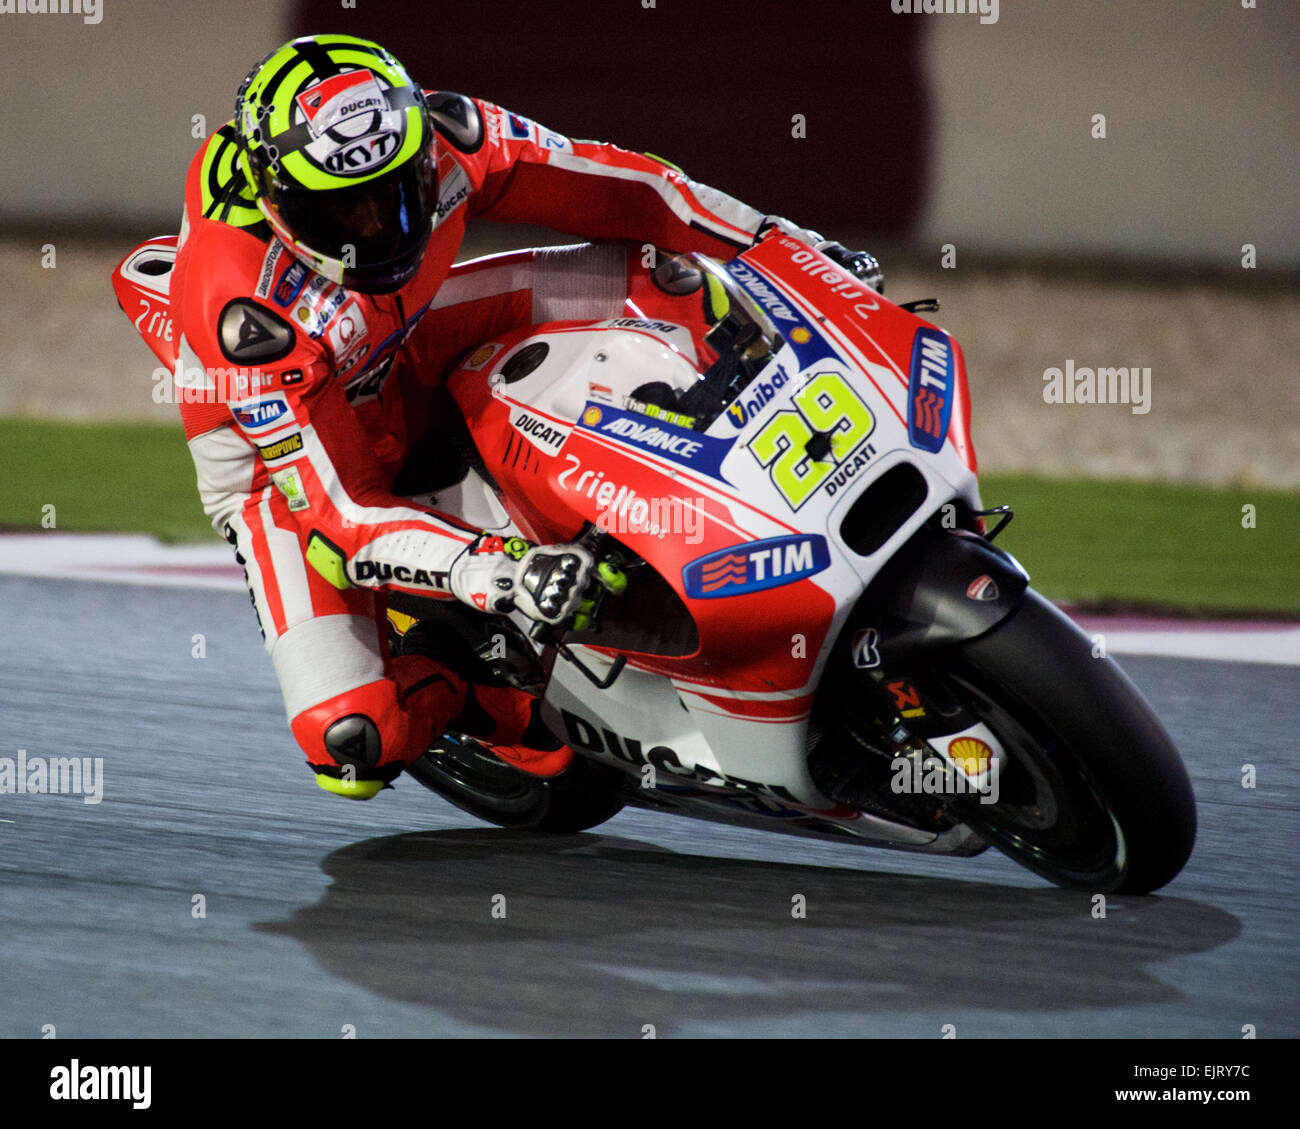 Losail Circuit, Qatar 29th March 2015, Ducati Team rider Andrea Iannone  during the 2015 FIM Motorcycle Grand Prix of Qatar © To Stock Photo - Alamy